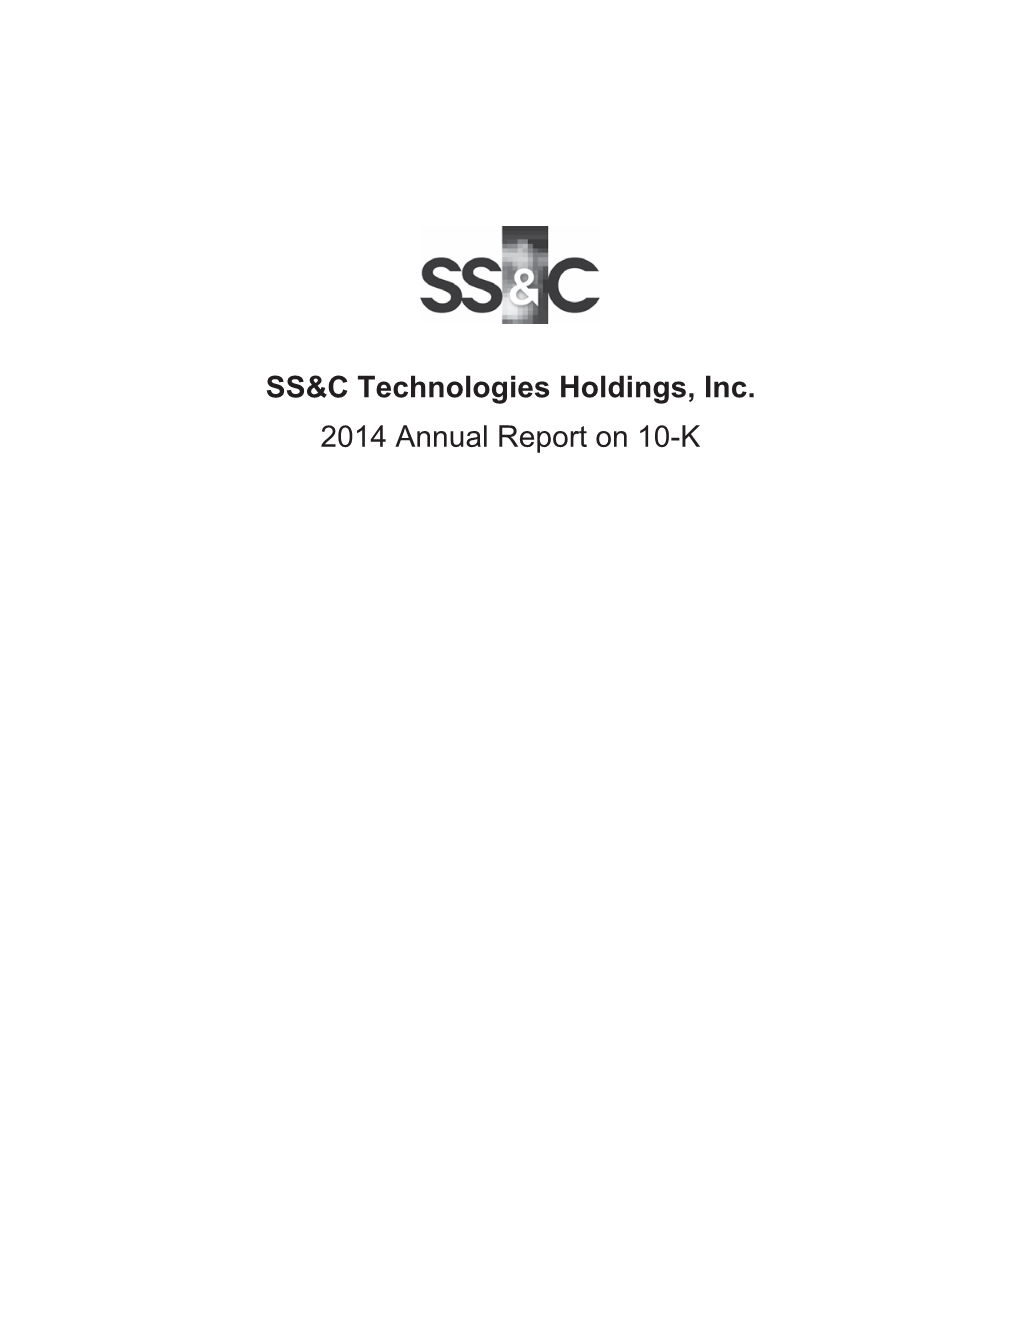 SS&C Technologies Holdings, Inc. 2014 Annual Report on 10-K